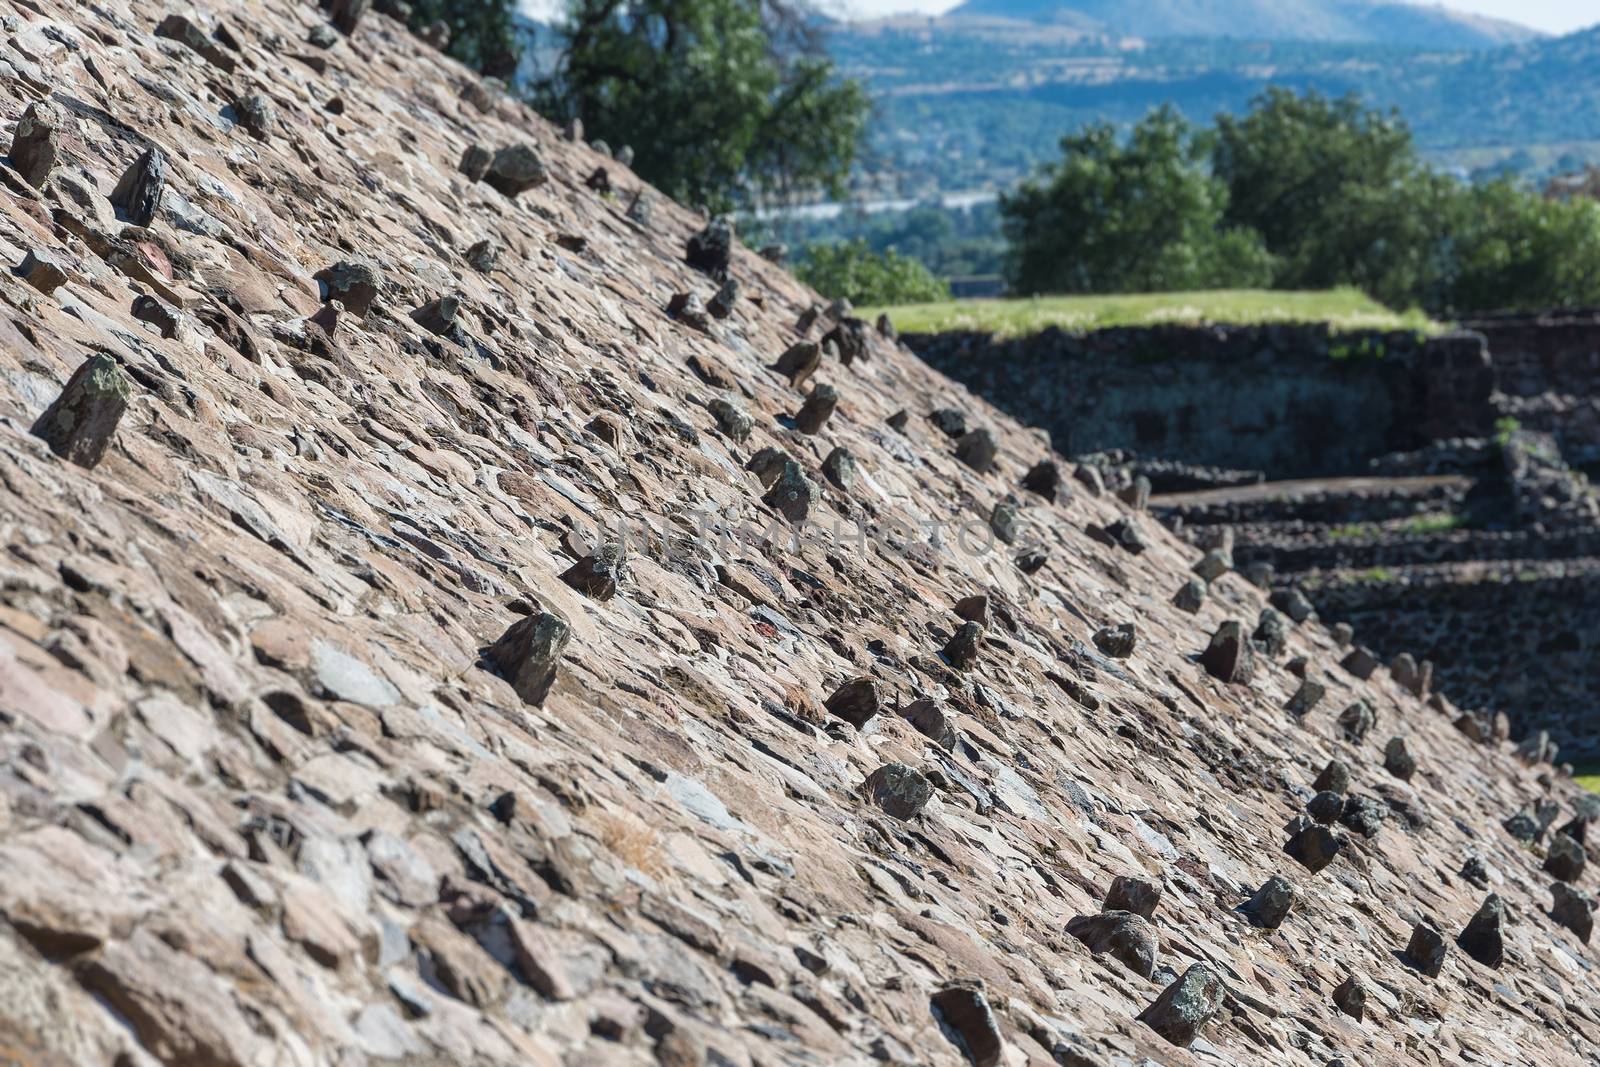 Rocks sticking out on the slope of the Pyramid of the Sun in San Joan Teotihuacan, near Mexico City in Mexico.